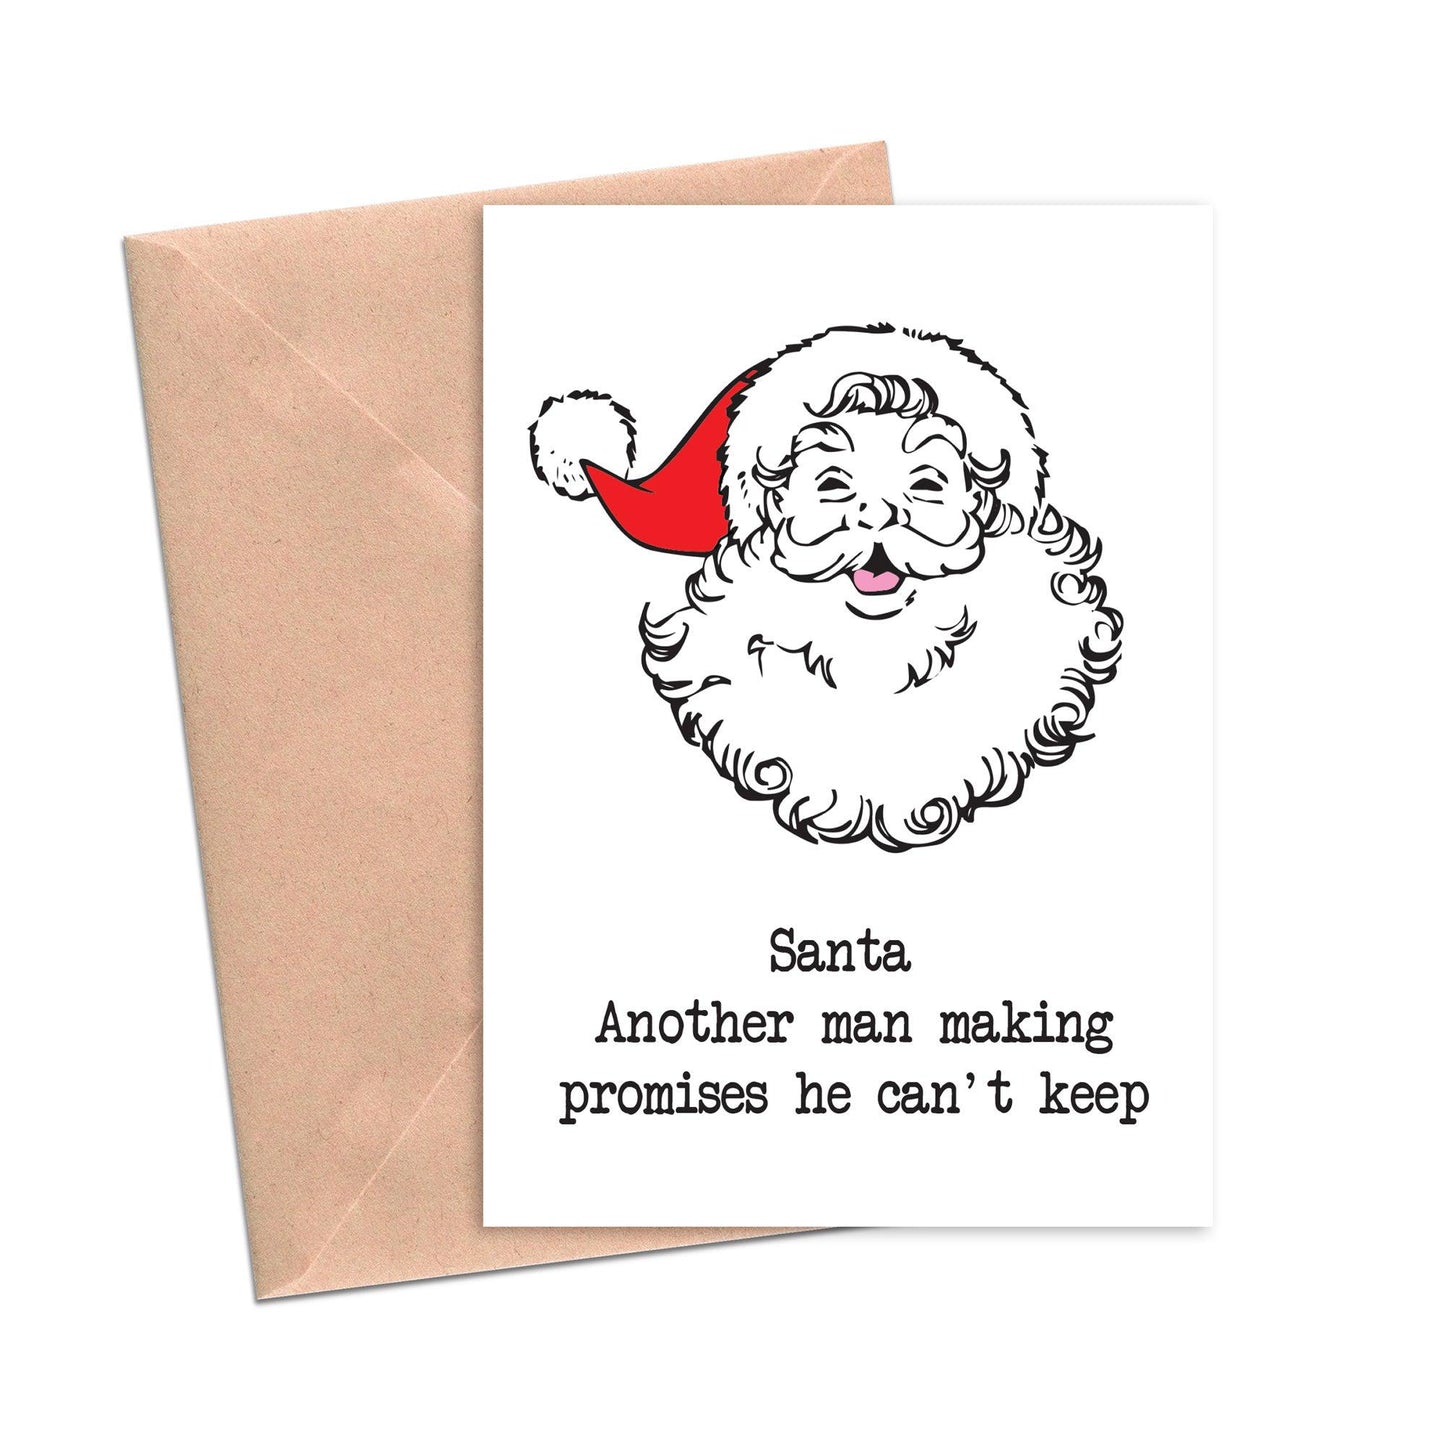 Funny Christmas Card Another Man Making Promises He Can't Keep Santa Funny Christmas Card-Holiday Cards-Crimson and Clover Studio